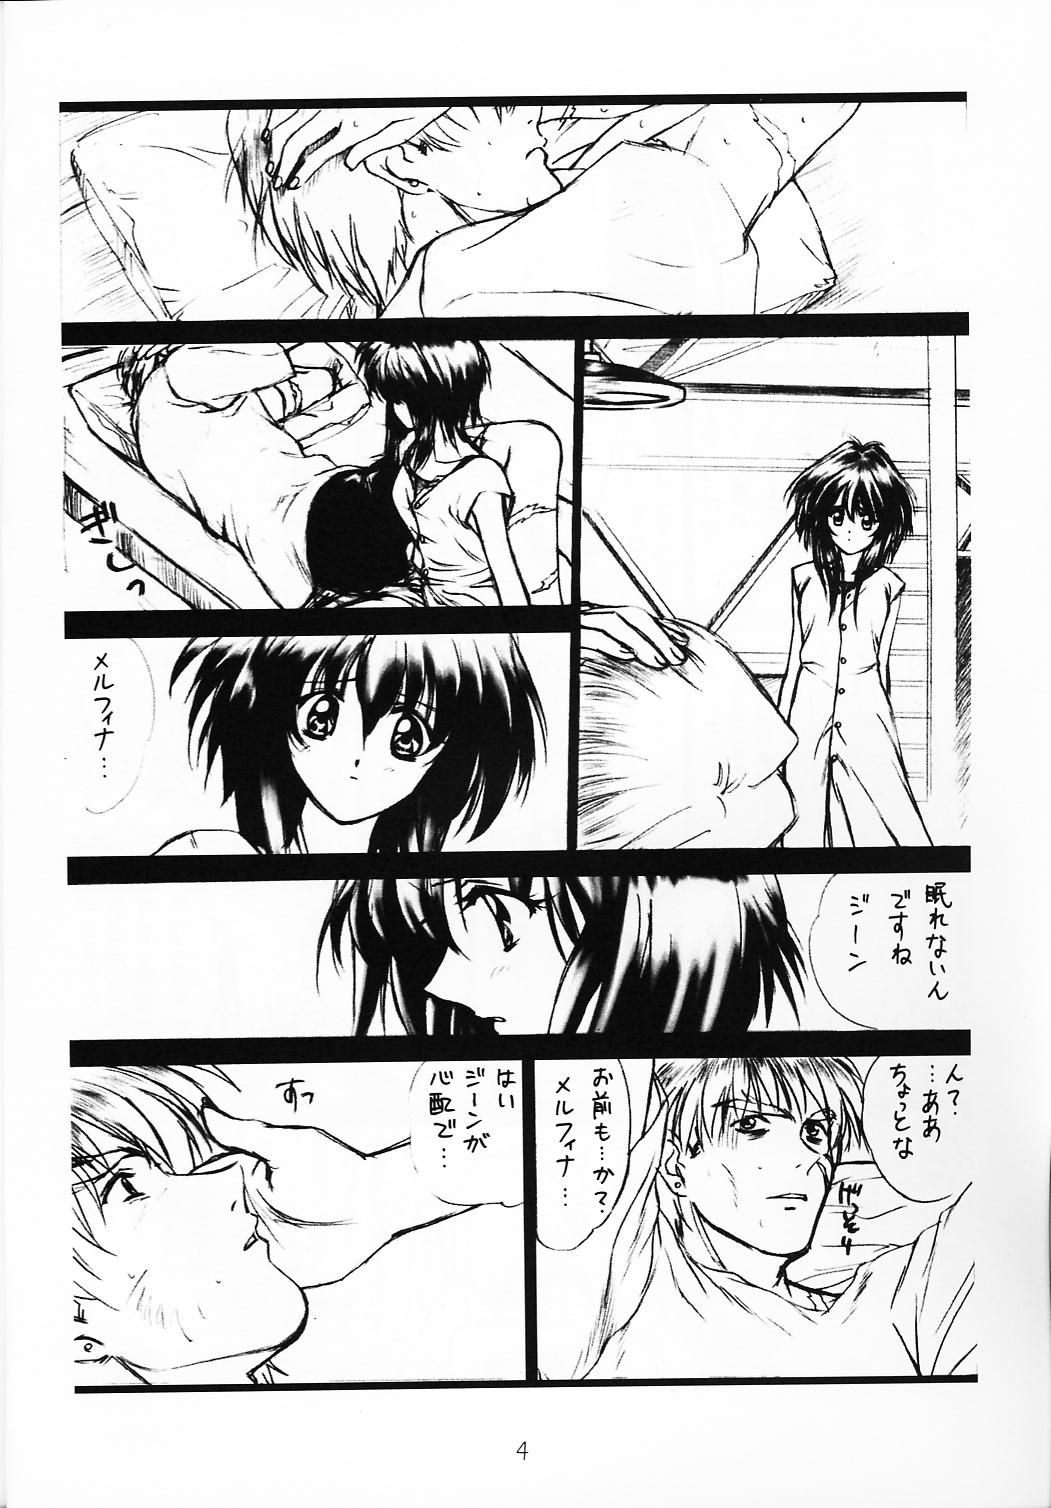 Hot Wife voguish I OUTLAW STAR - Outlaw star Glasses - Page 3